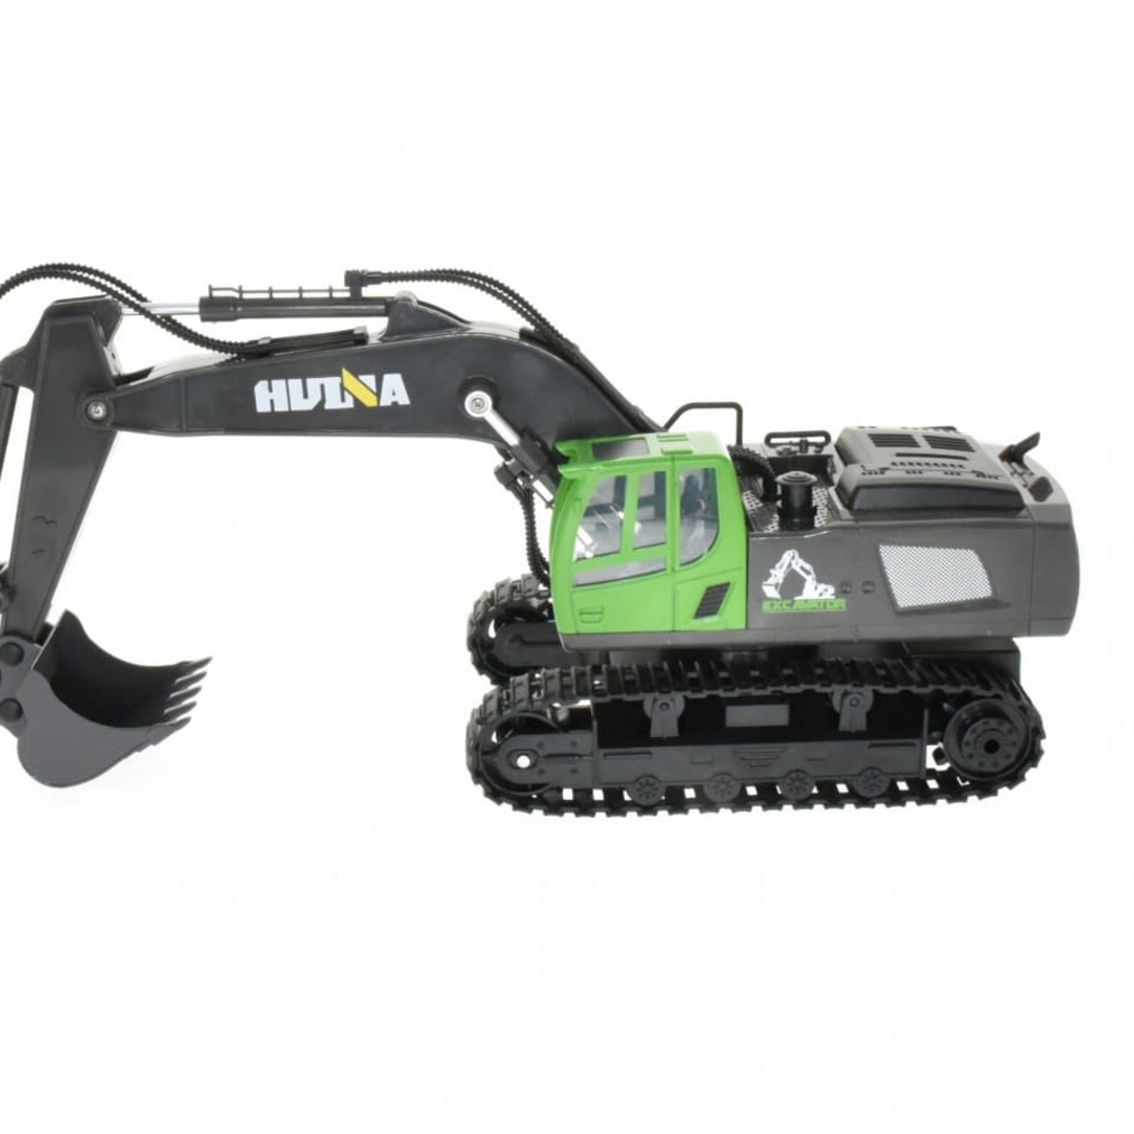 CIS-1558 1:18 scale 2.4 GHz 11 channel plastic excavator - Image 5 of 5